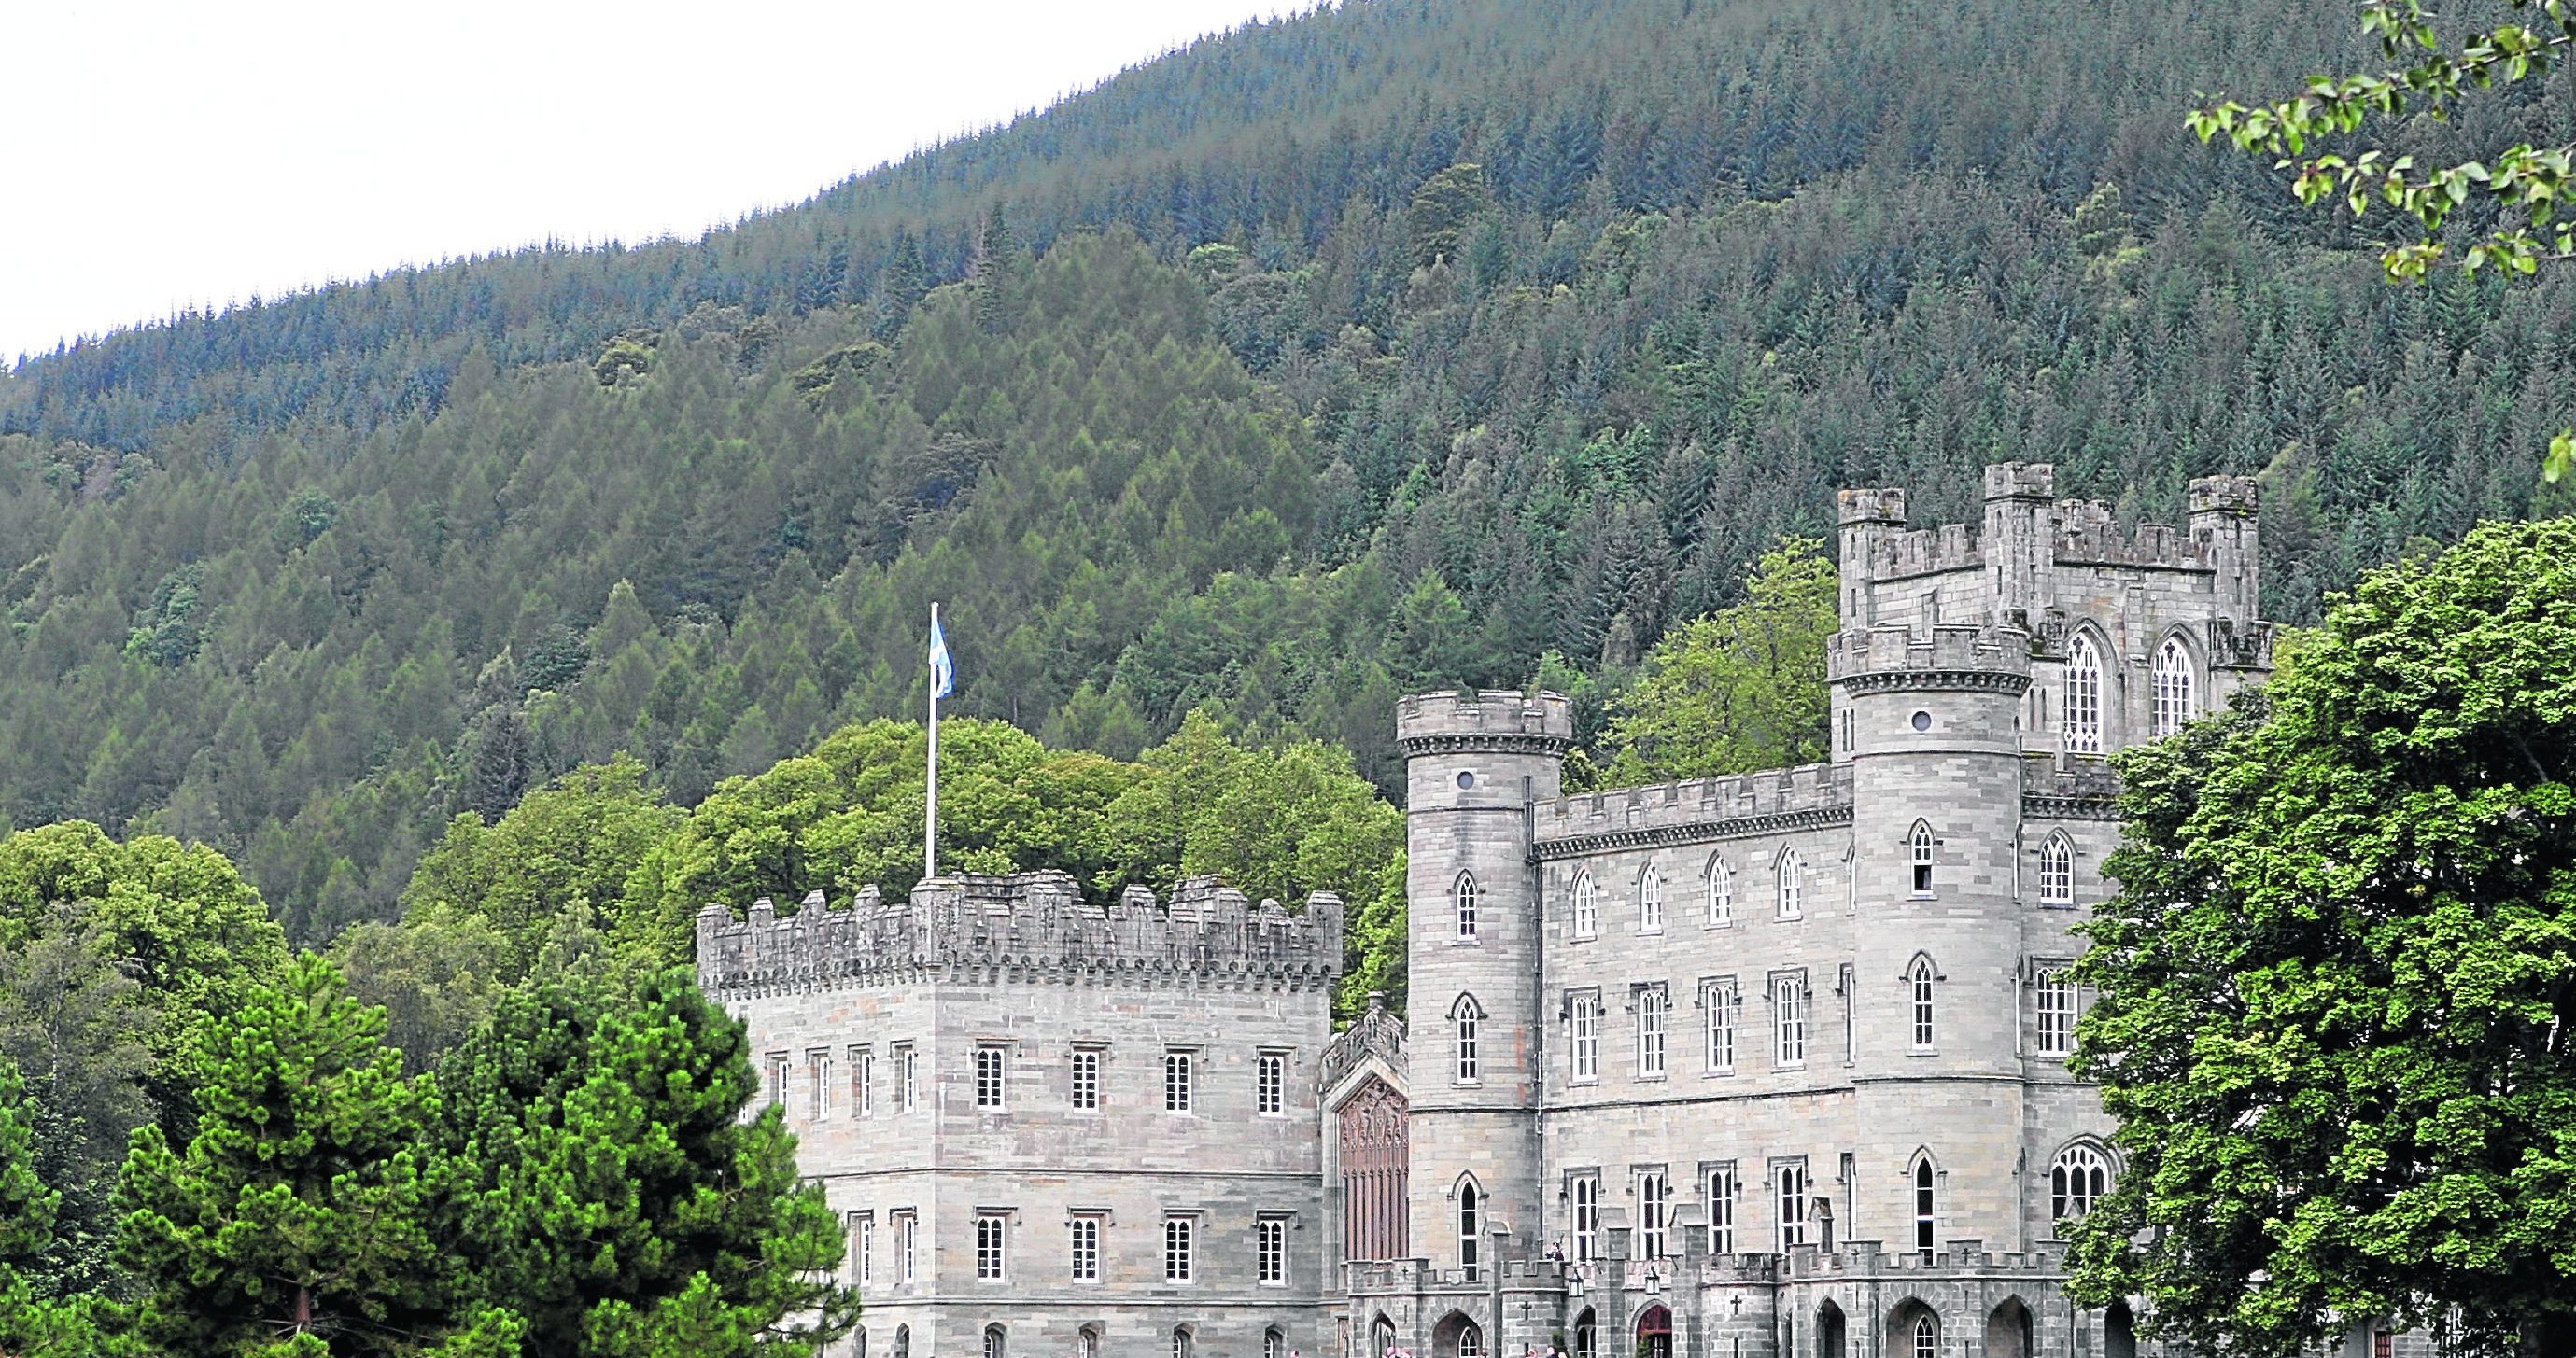 Taymouth Castle, Kenmore.